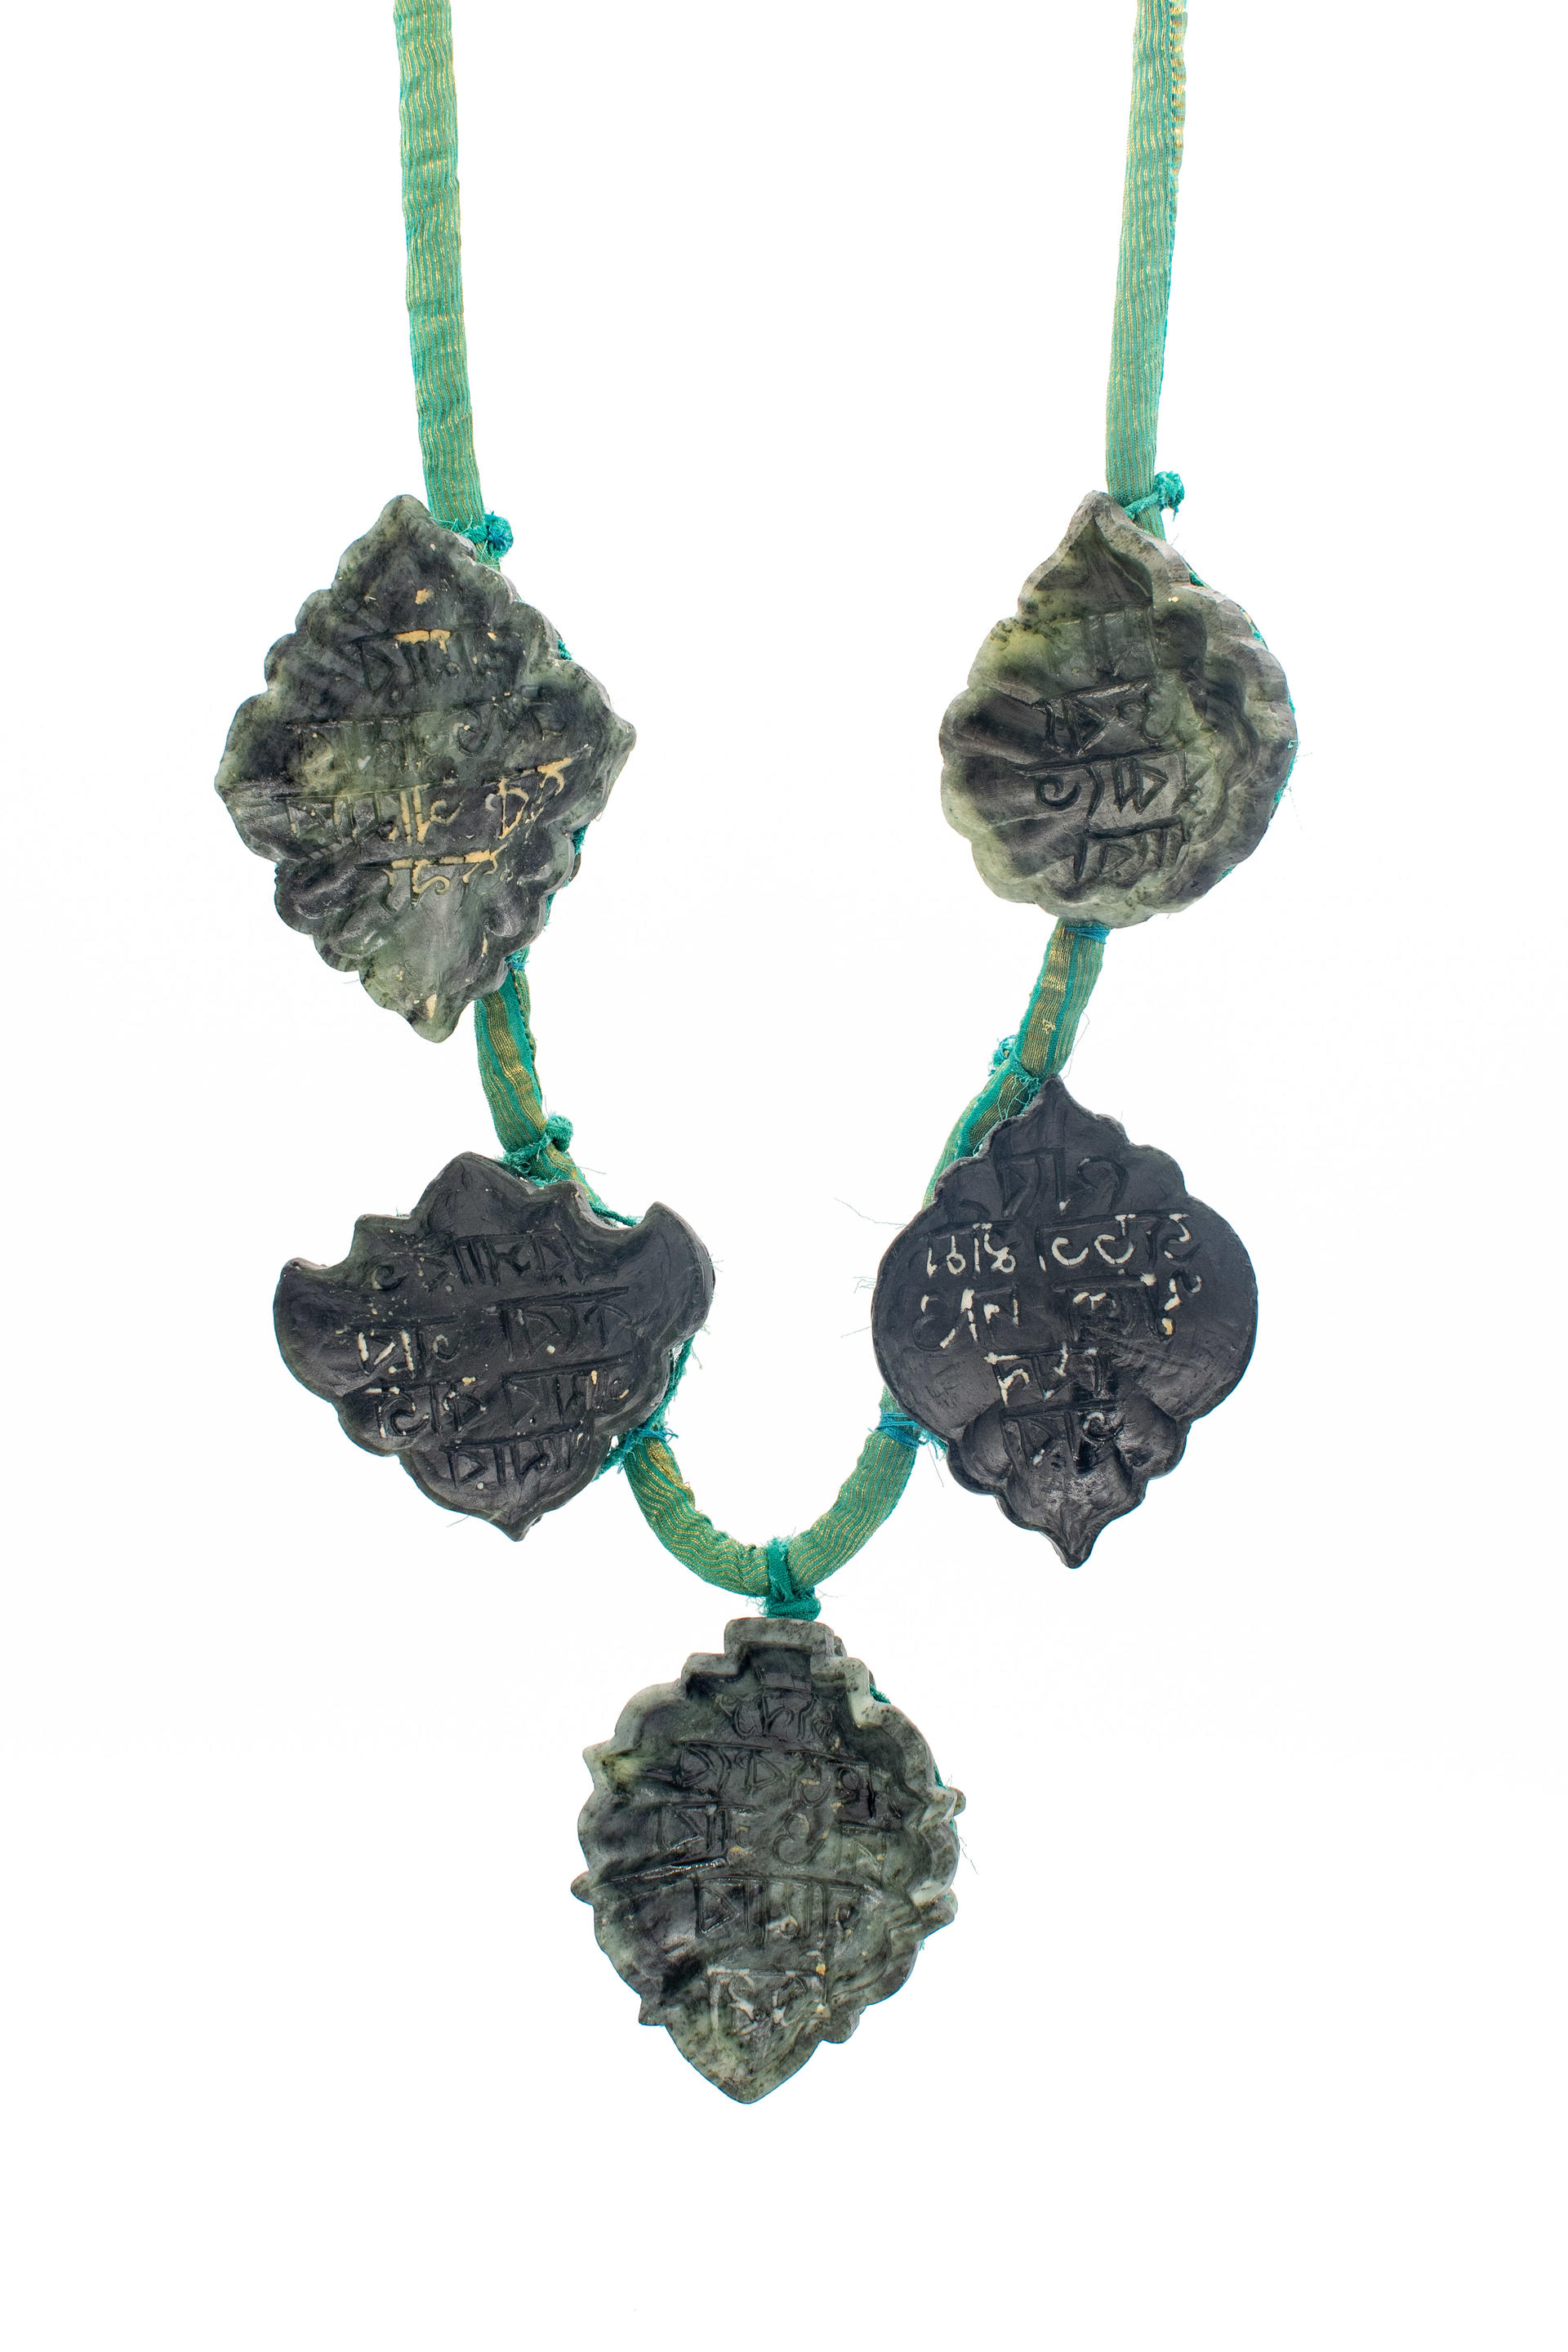 Necklace made with three soapstone confection molds and saree fabric.